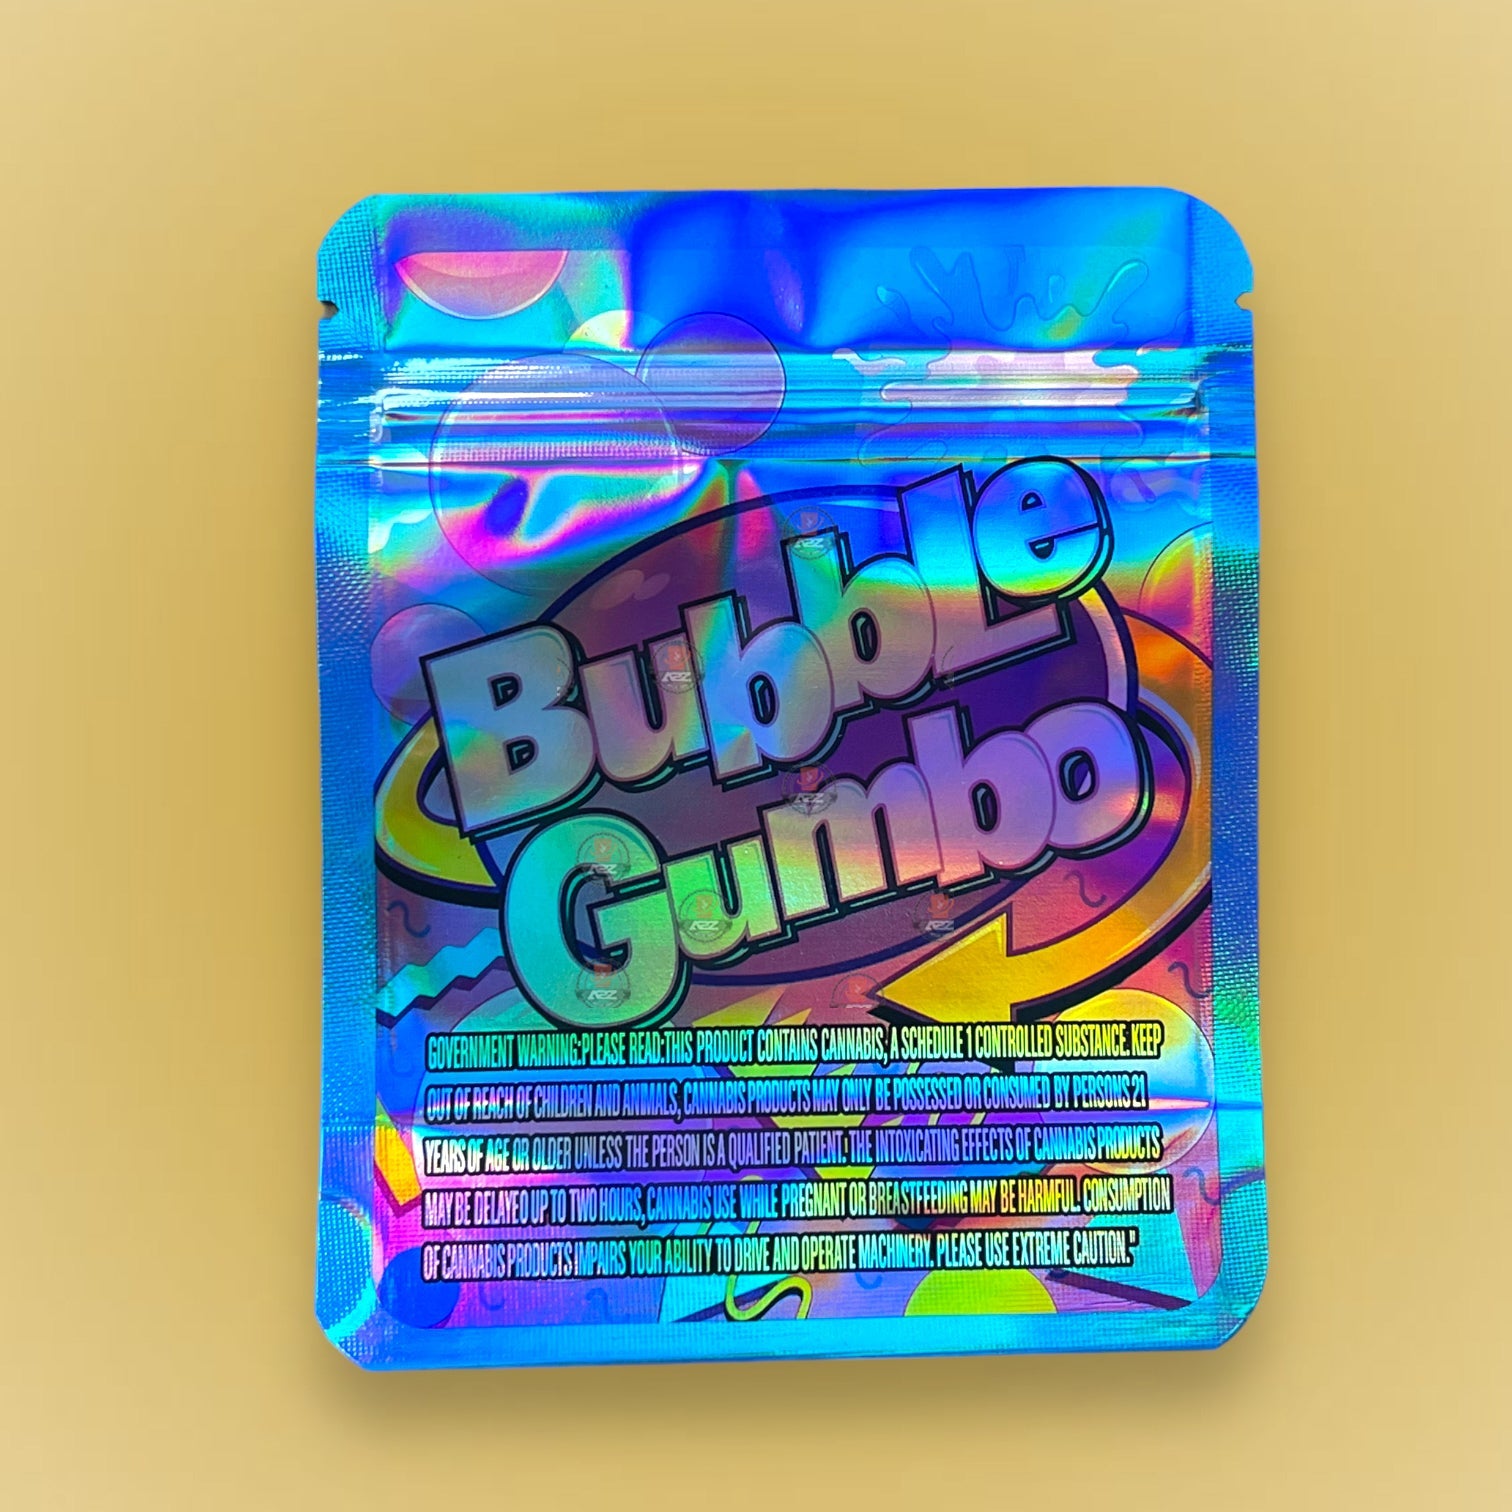 Bubble Gumbo 3.5g Mylar Bag Holographic- Packaging Only